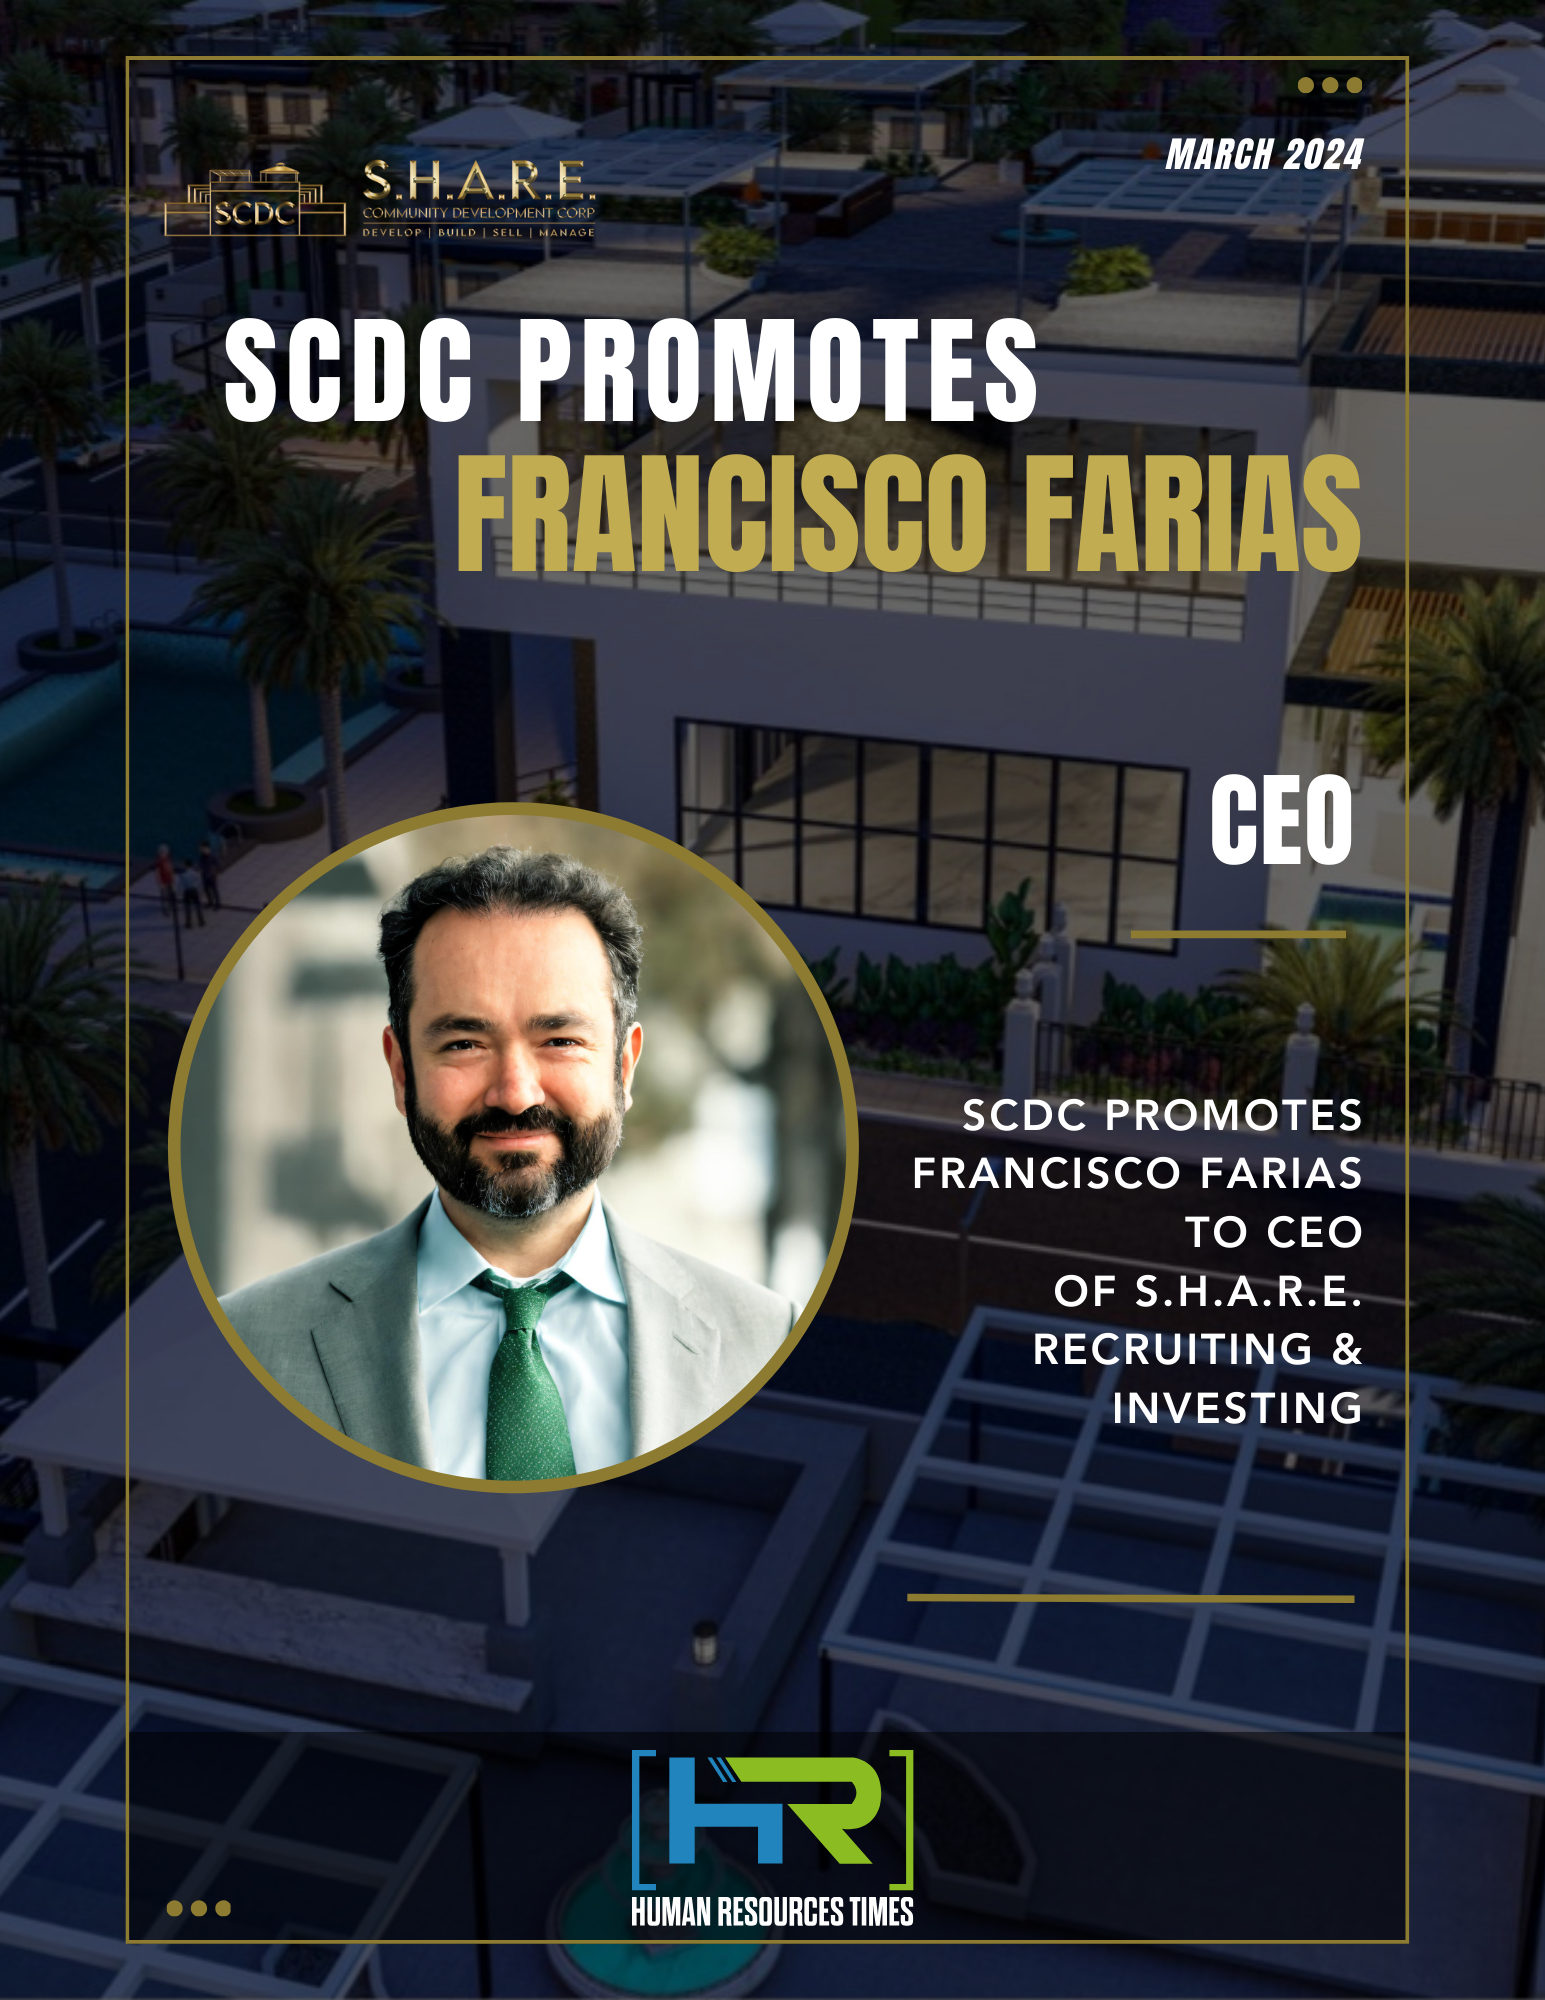 SCDC Promotes Francisco Farias to CEO Of S.H.A.R.E. Staffing & Recruiting